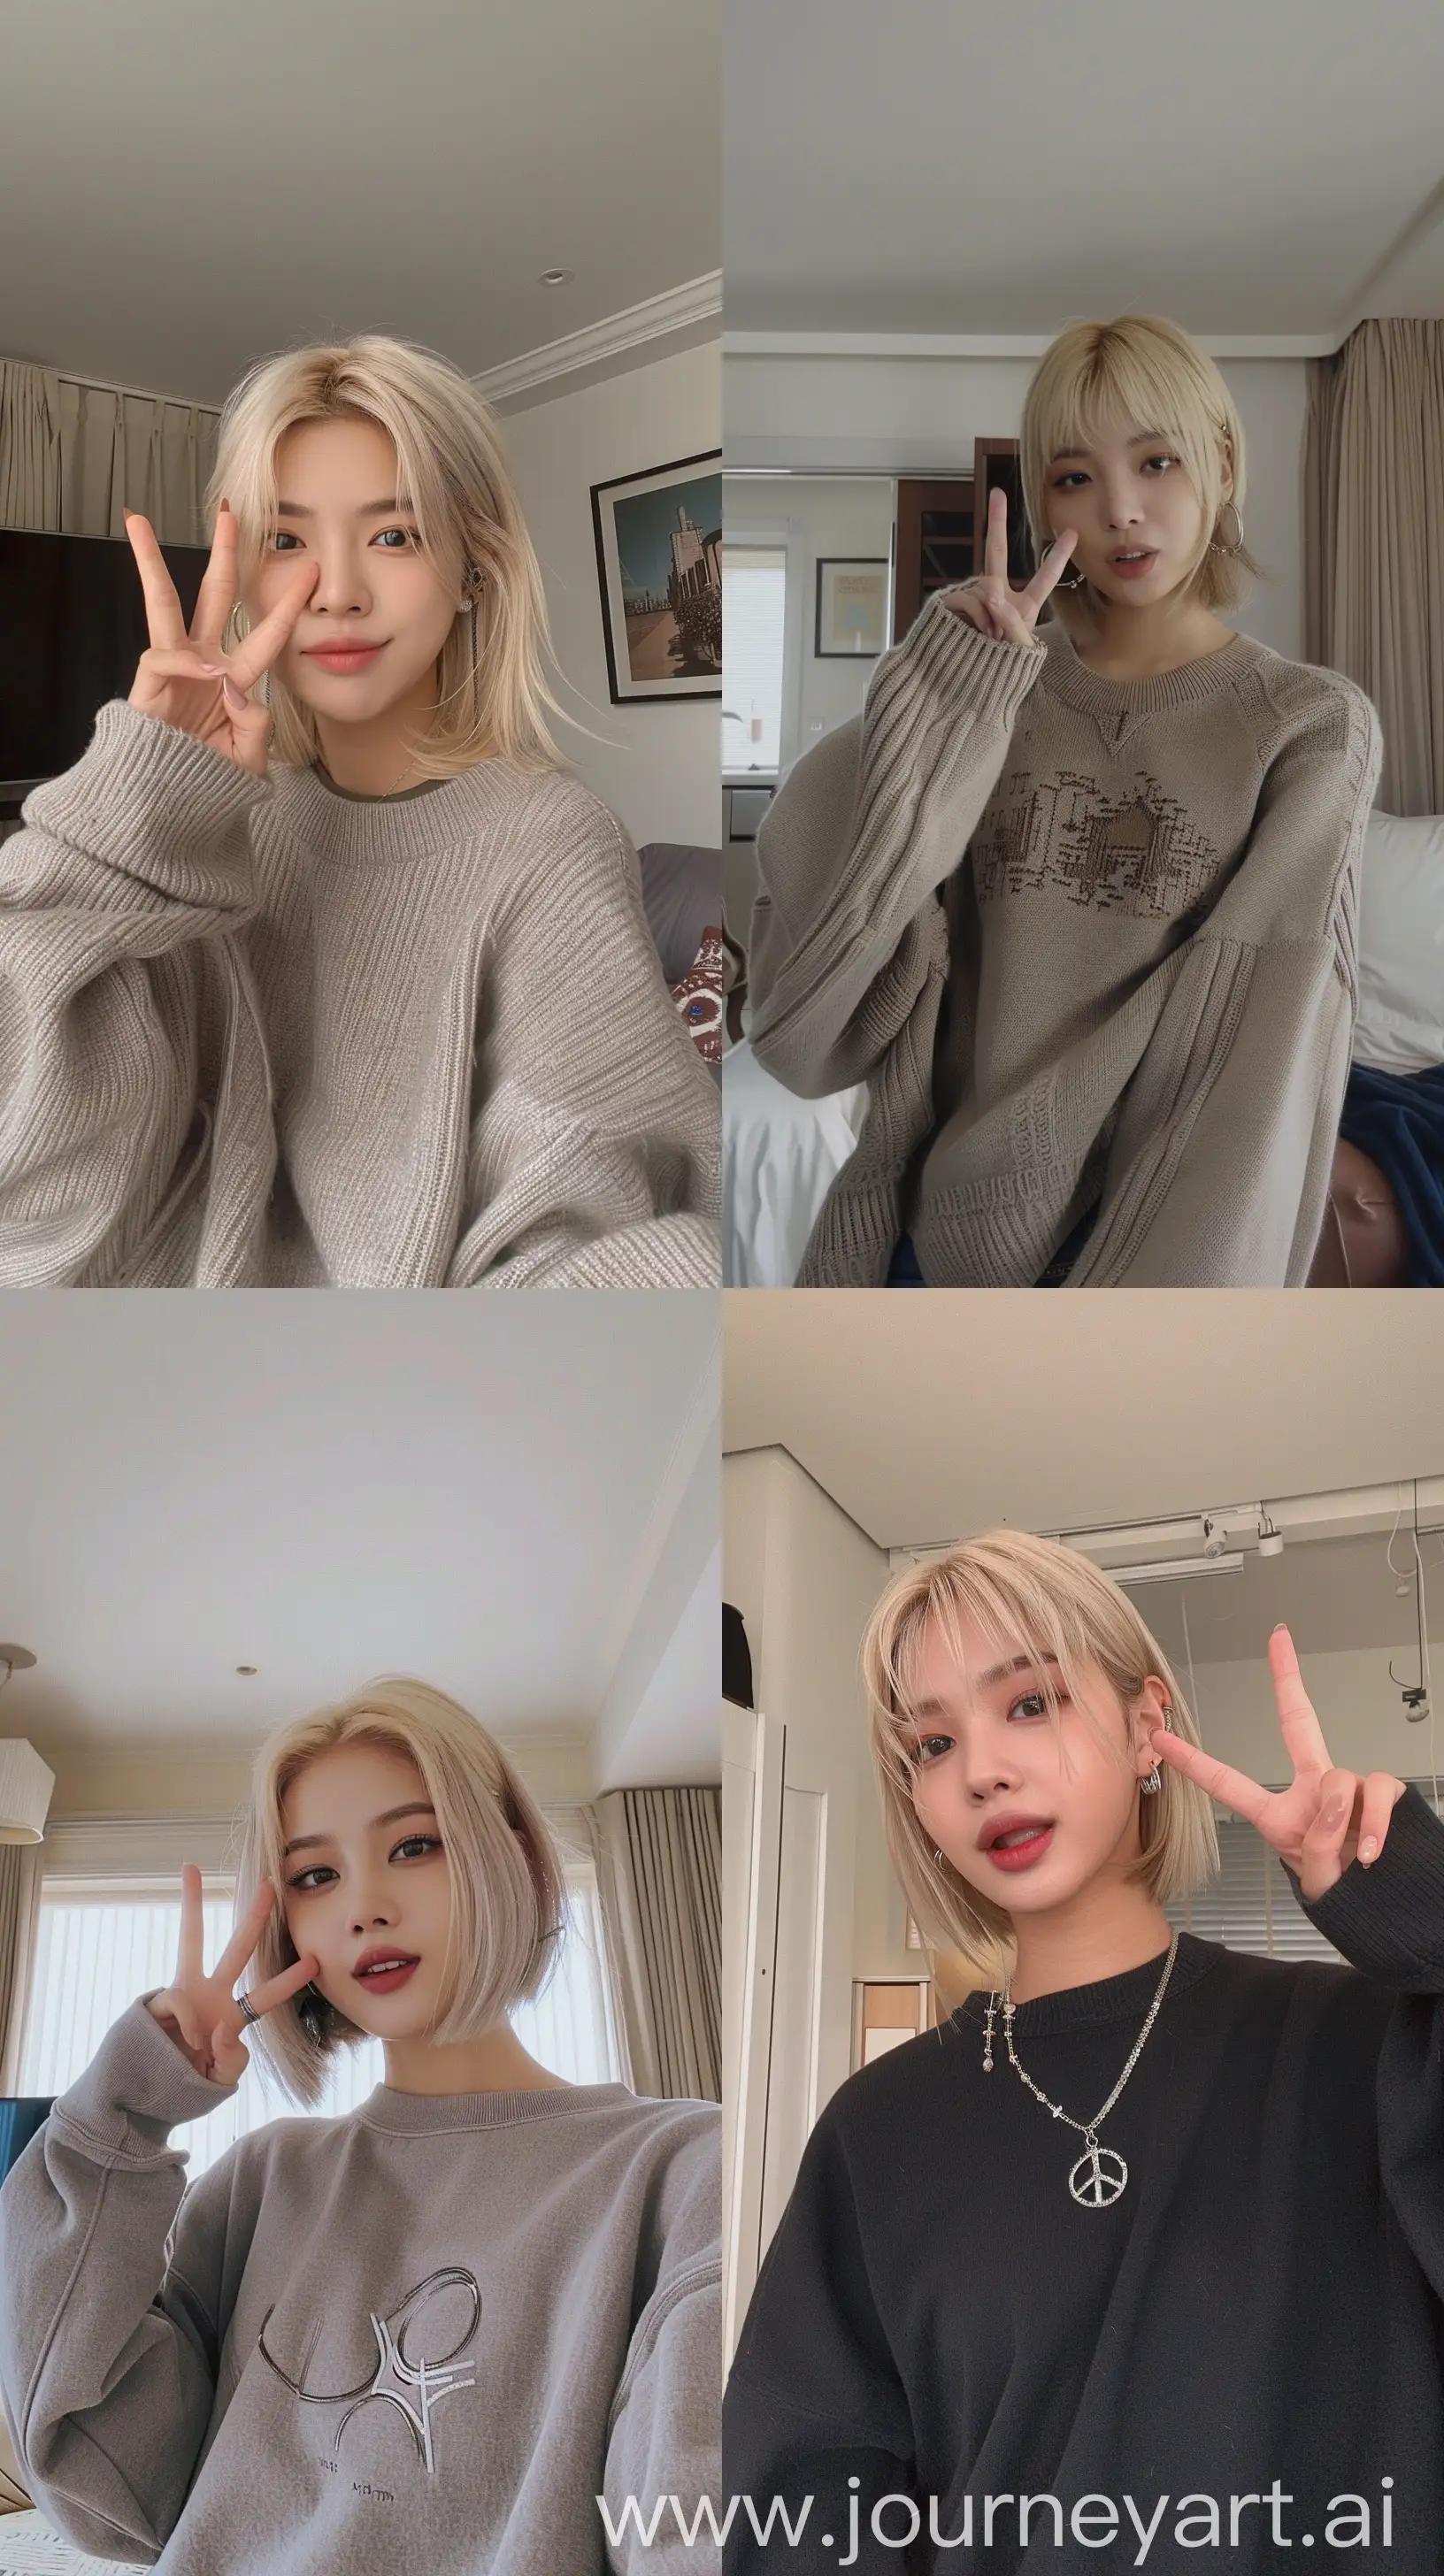 Blonde-Wolfcut-Jennie-from-Blackpink-Poses-in-Oversized-Stussy-Crewneck